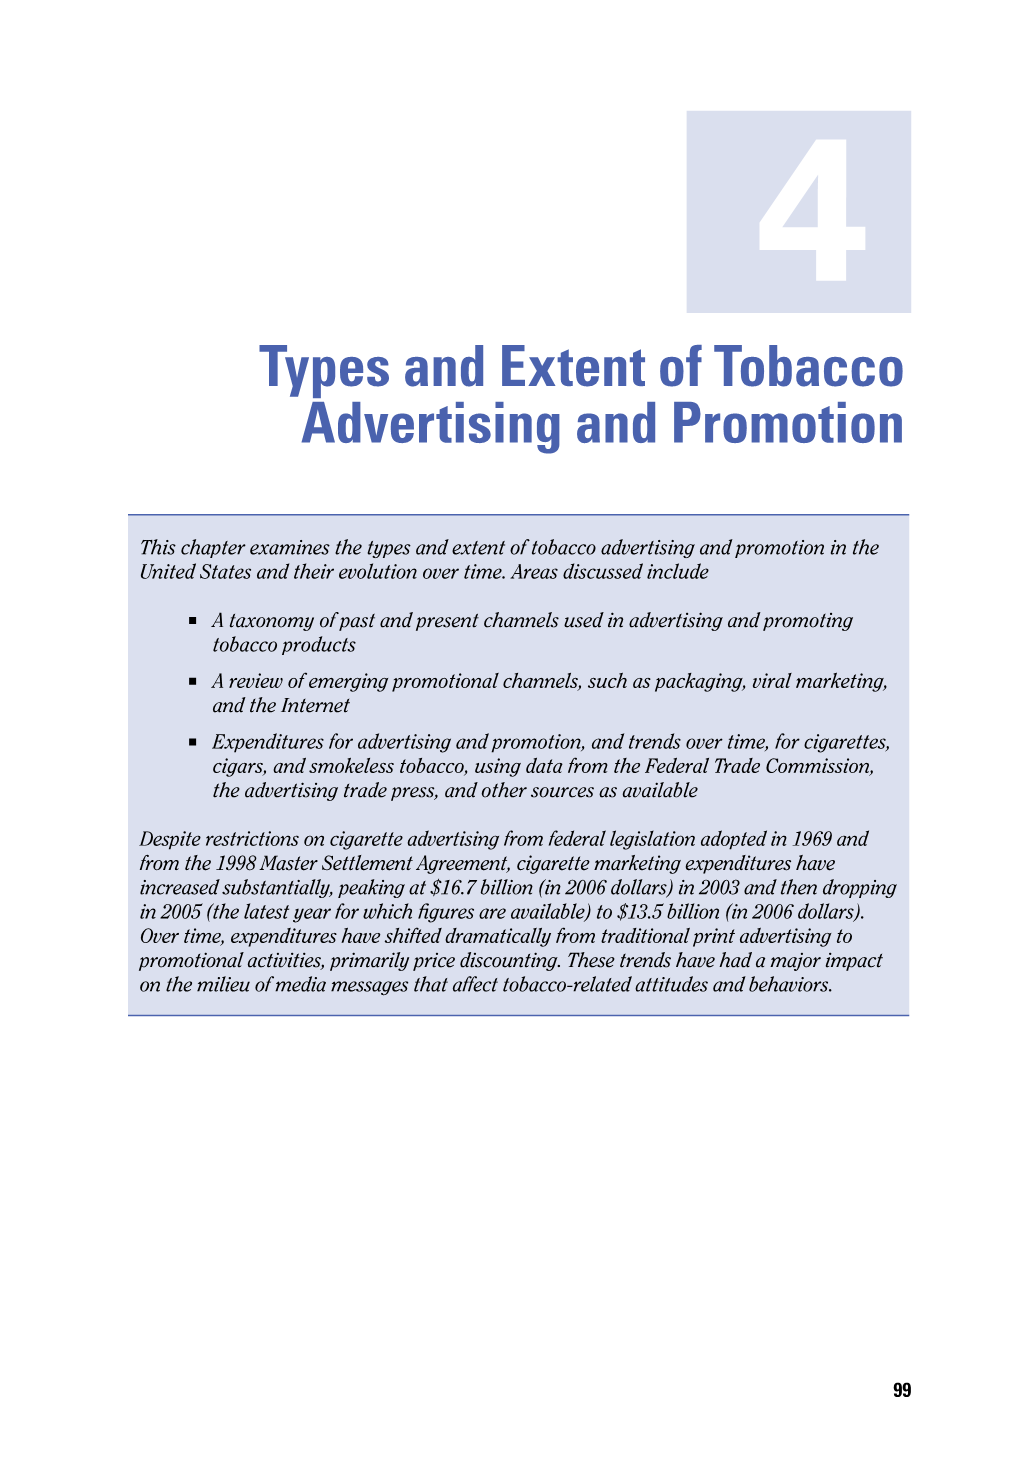 Types and Extent of Tobacco Advertising and Promotion